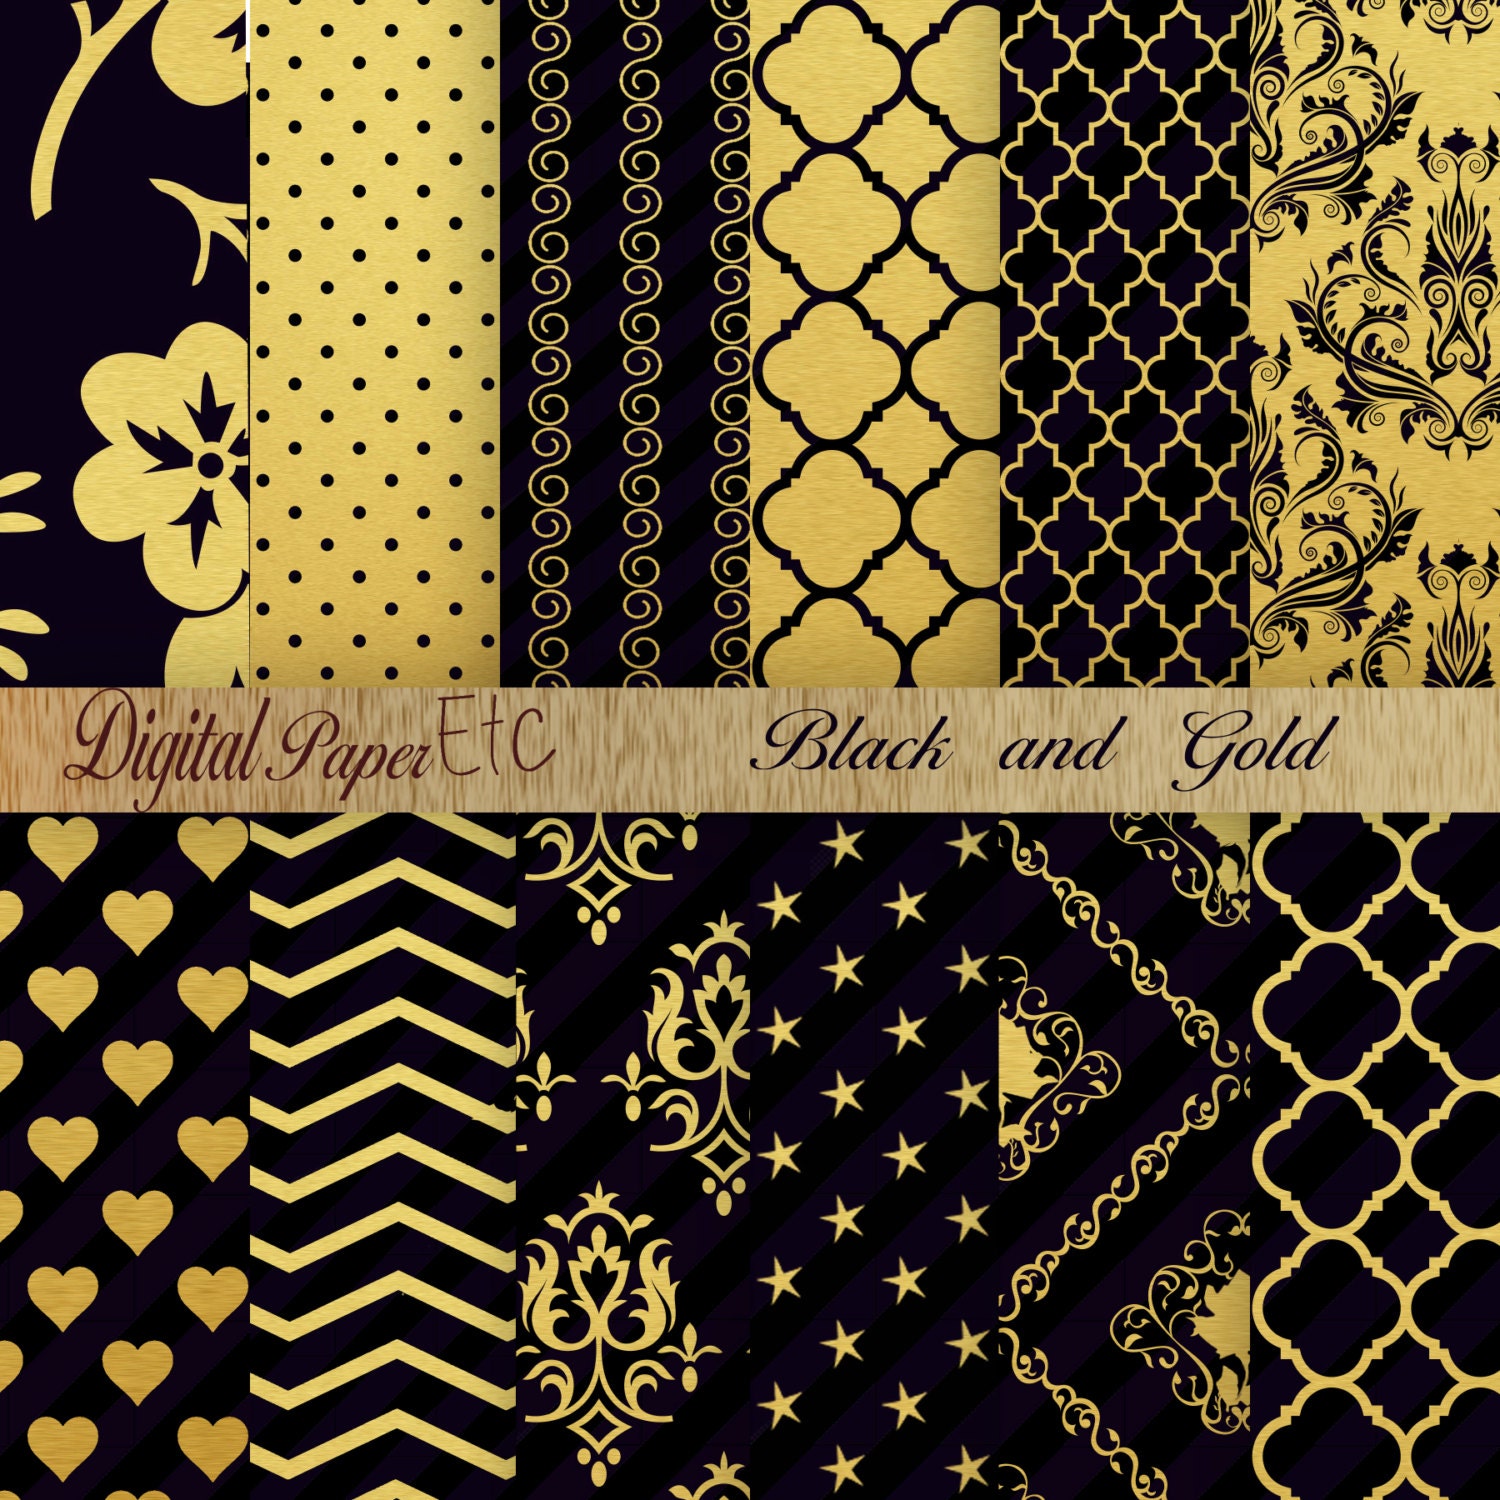 Download Black and Gold Digital Paper Black and Gold by digitalpaperetc